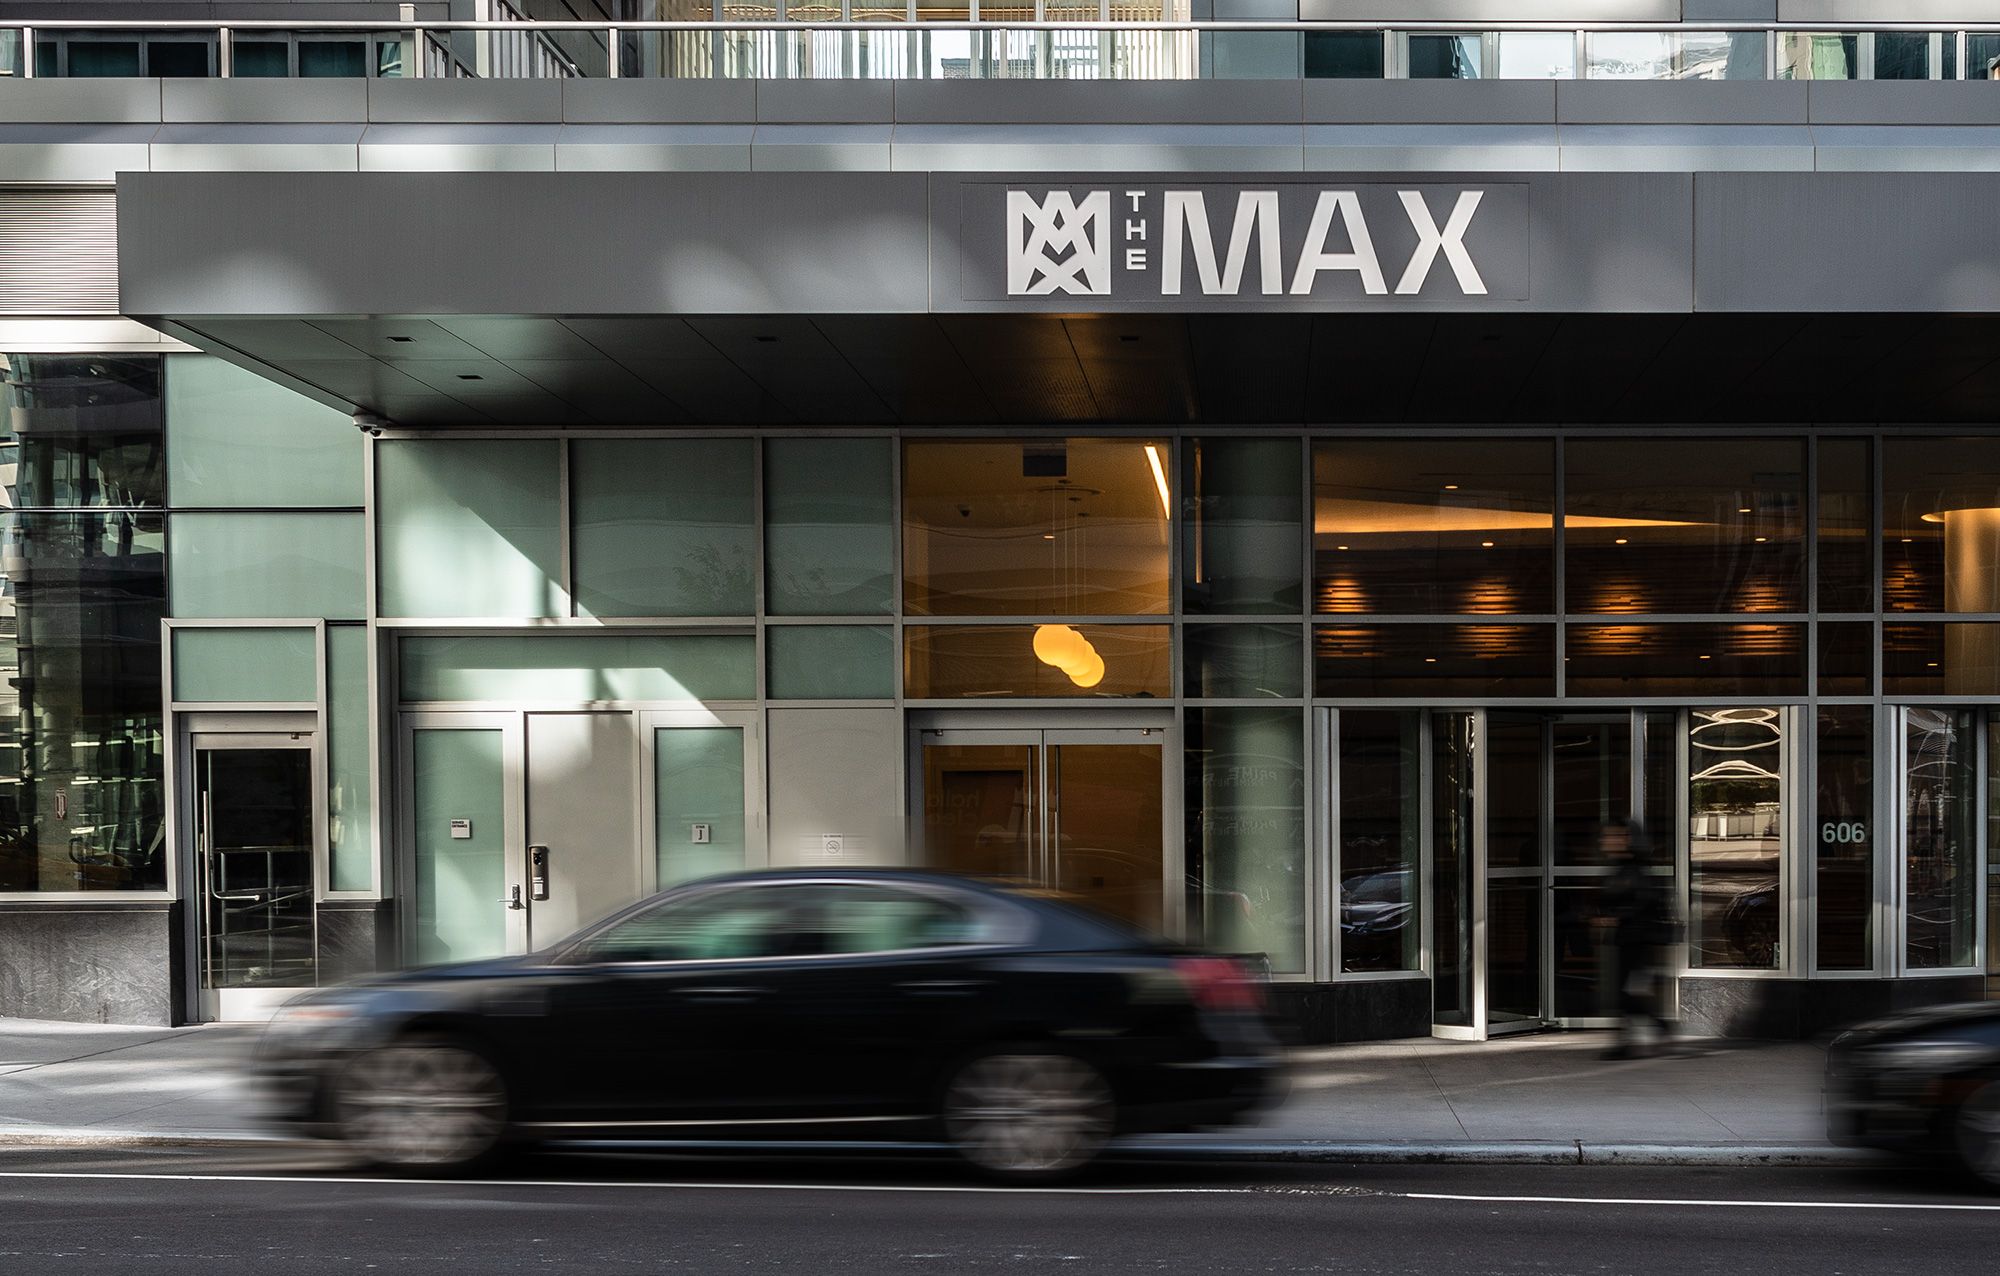 Photograph of The Max's entrance and canopy sign from street level during the day